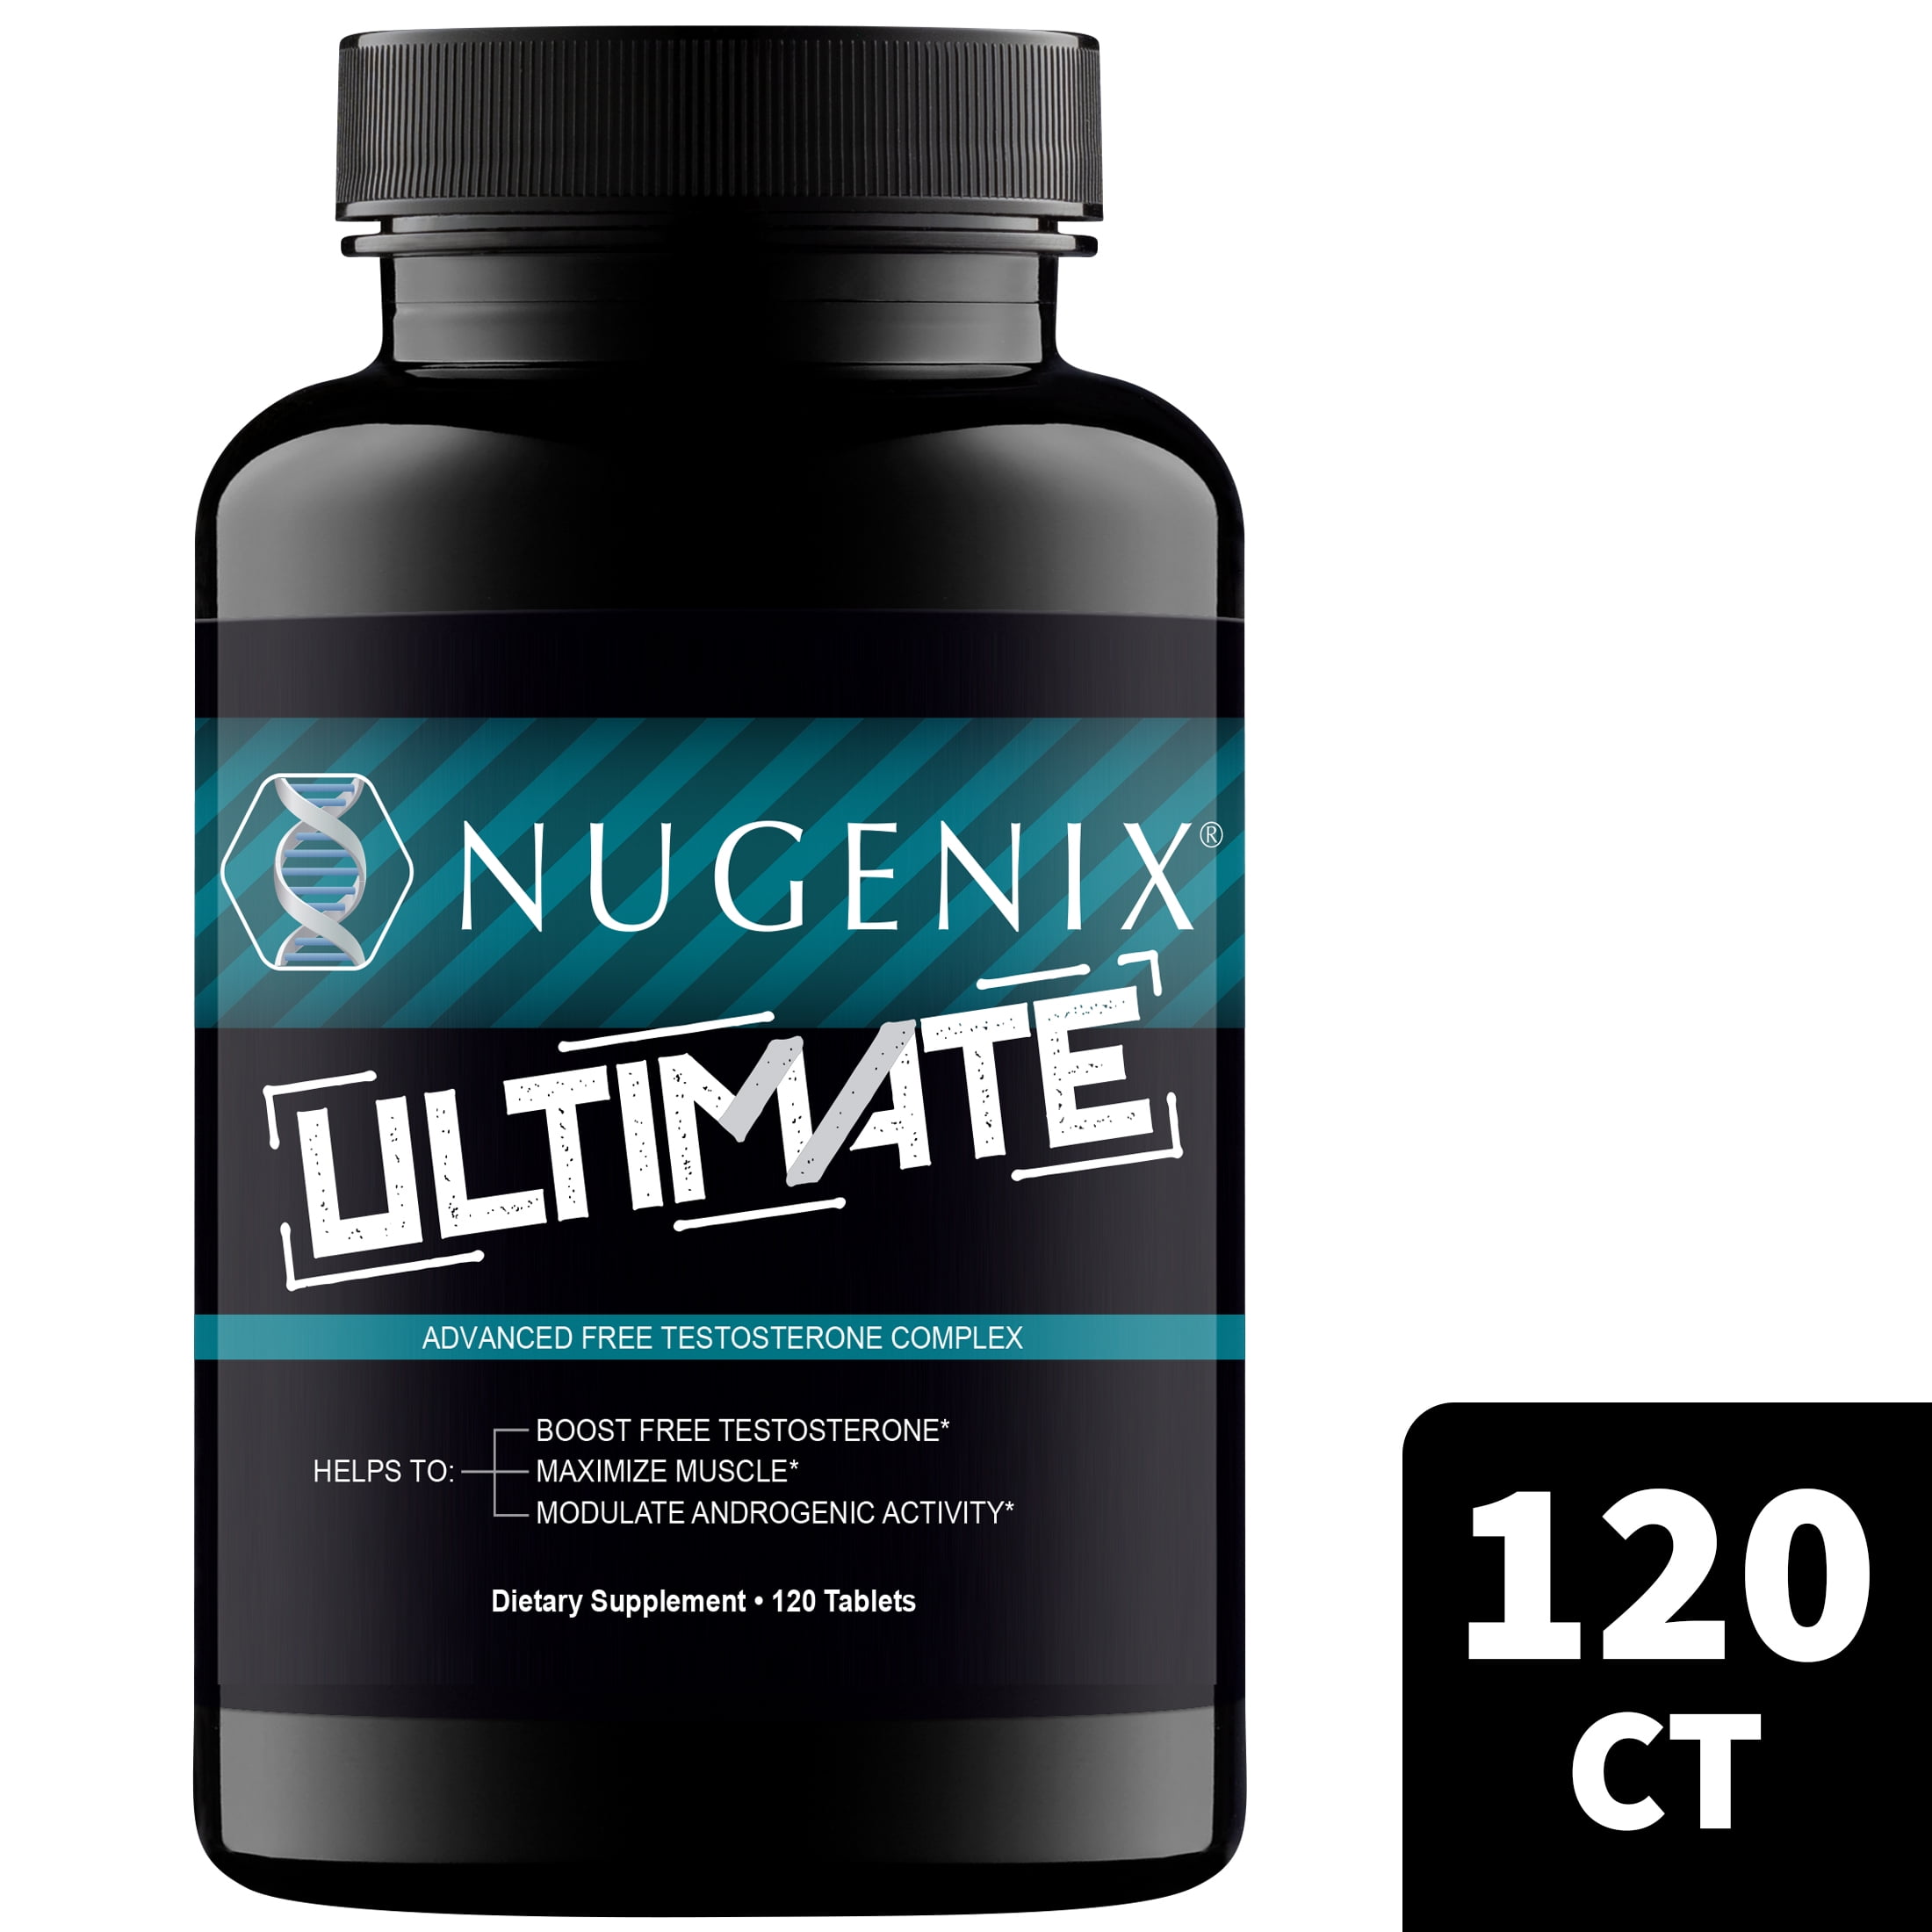 Nugenix Ultimate Testosterone, Test Booster, 120 Ct 